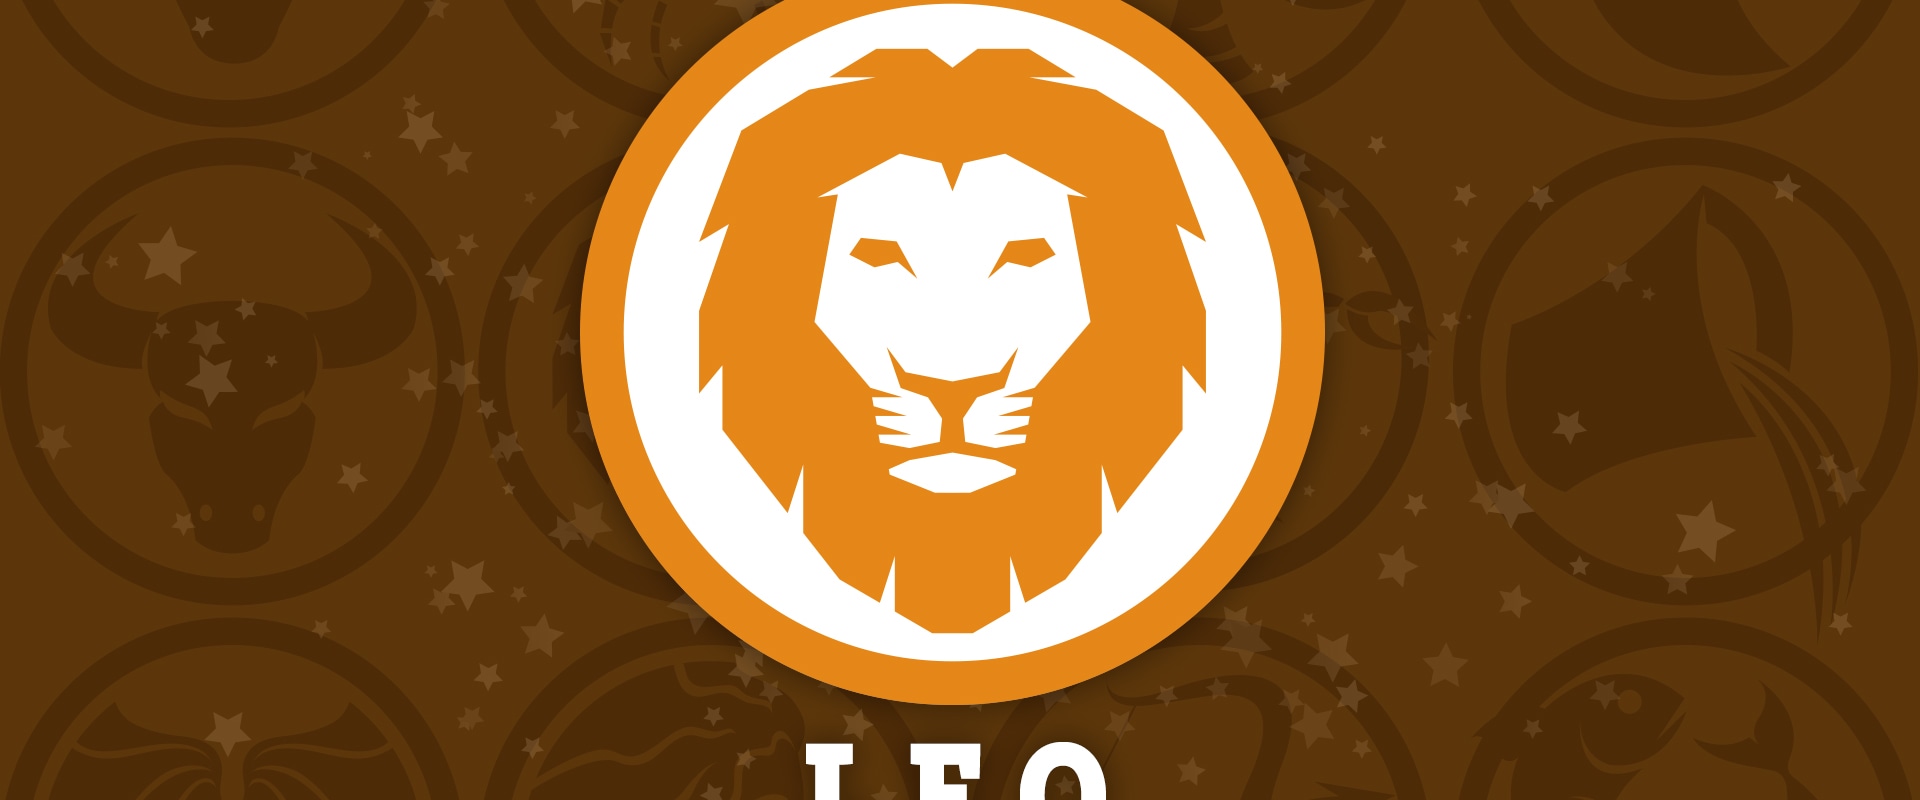 Leo Weekly Horoscope: What to Expect This Week